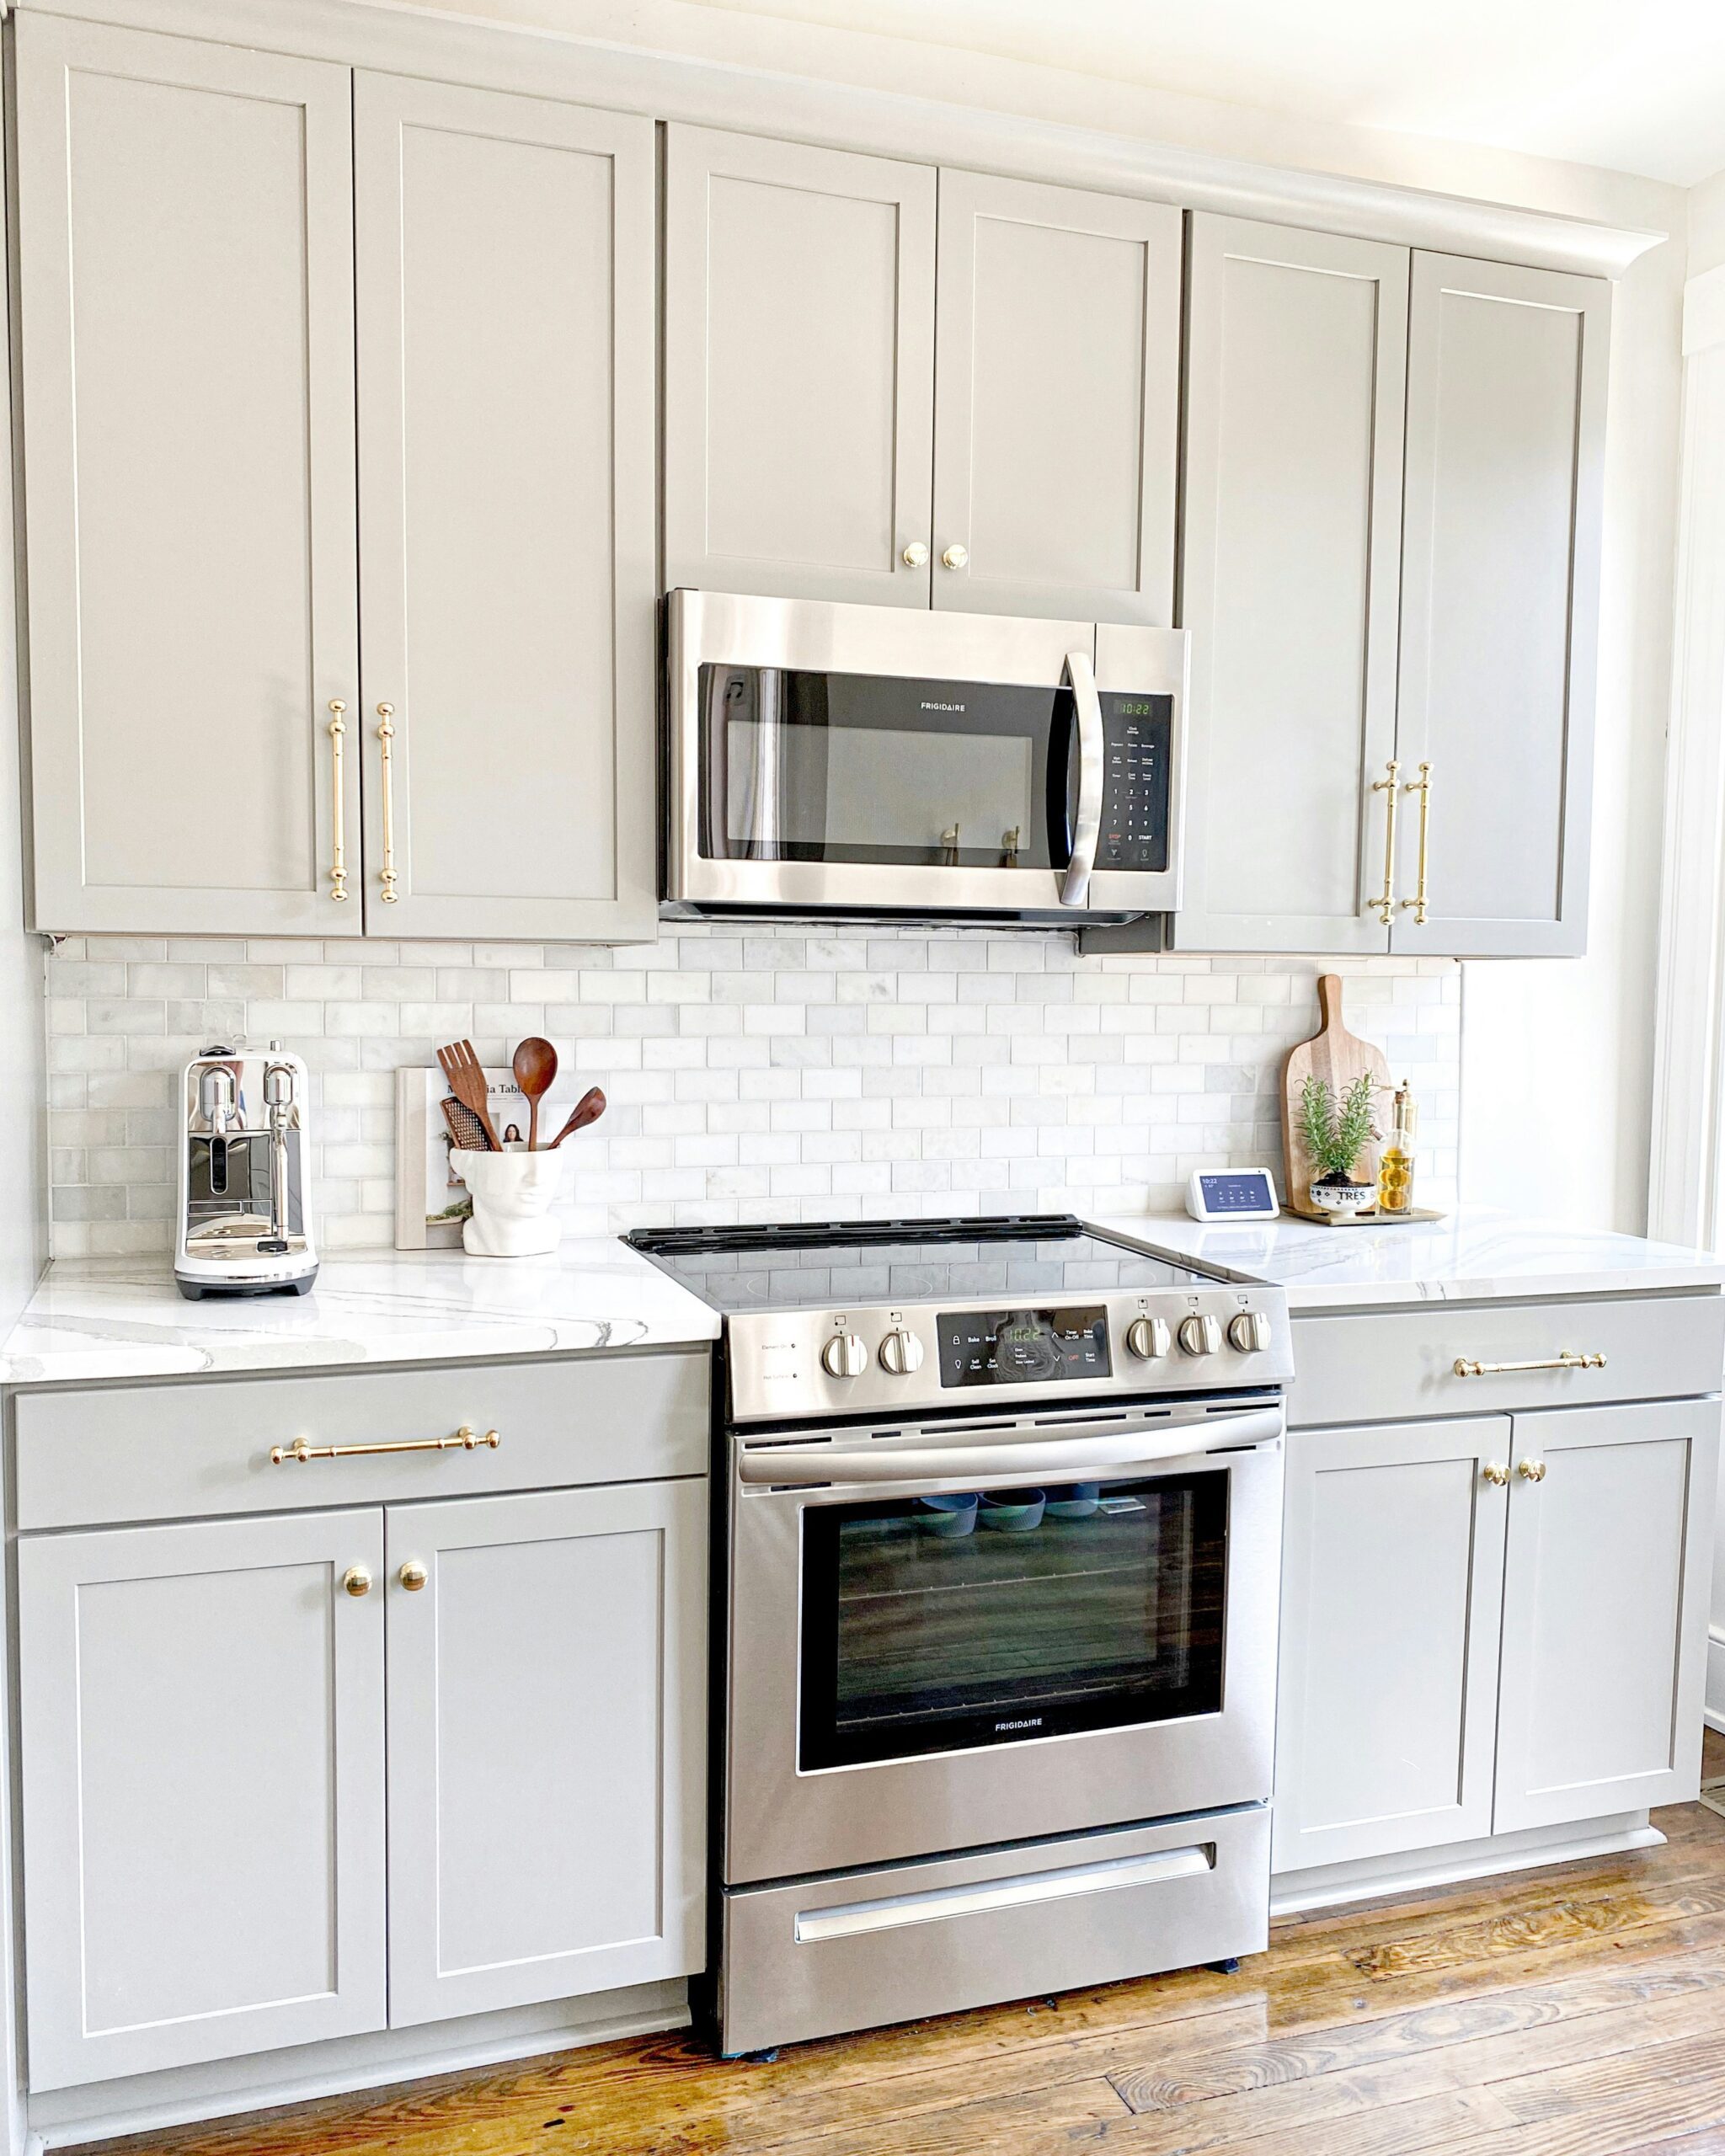 What do you do with Appliances in a Small Kitchen?